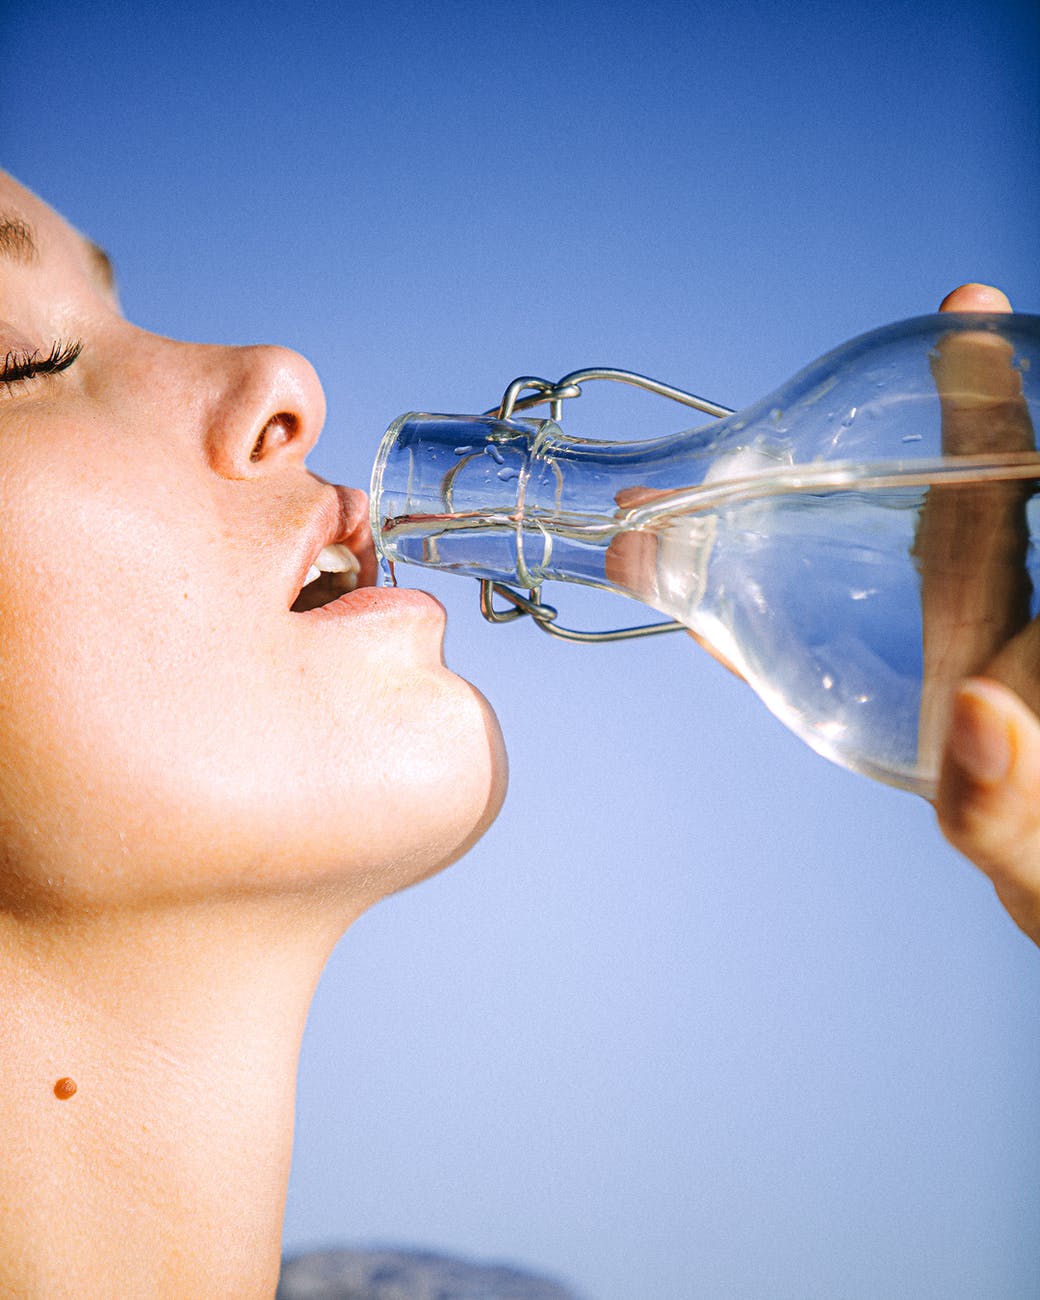 Eight glasses of water per day is a myth that refuses to die